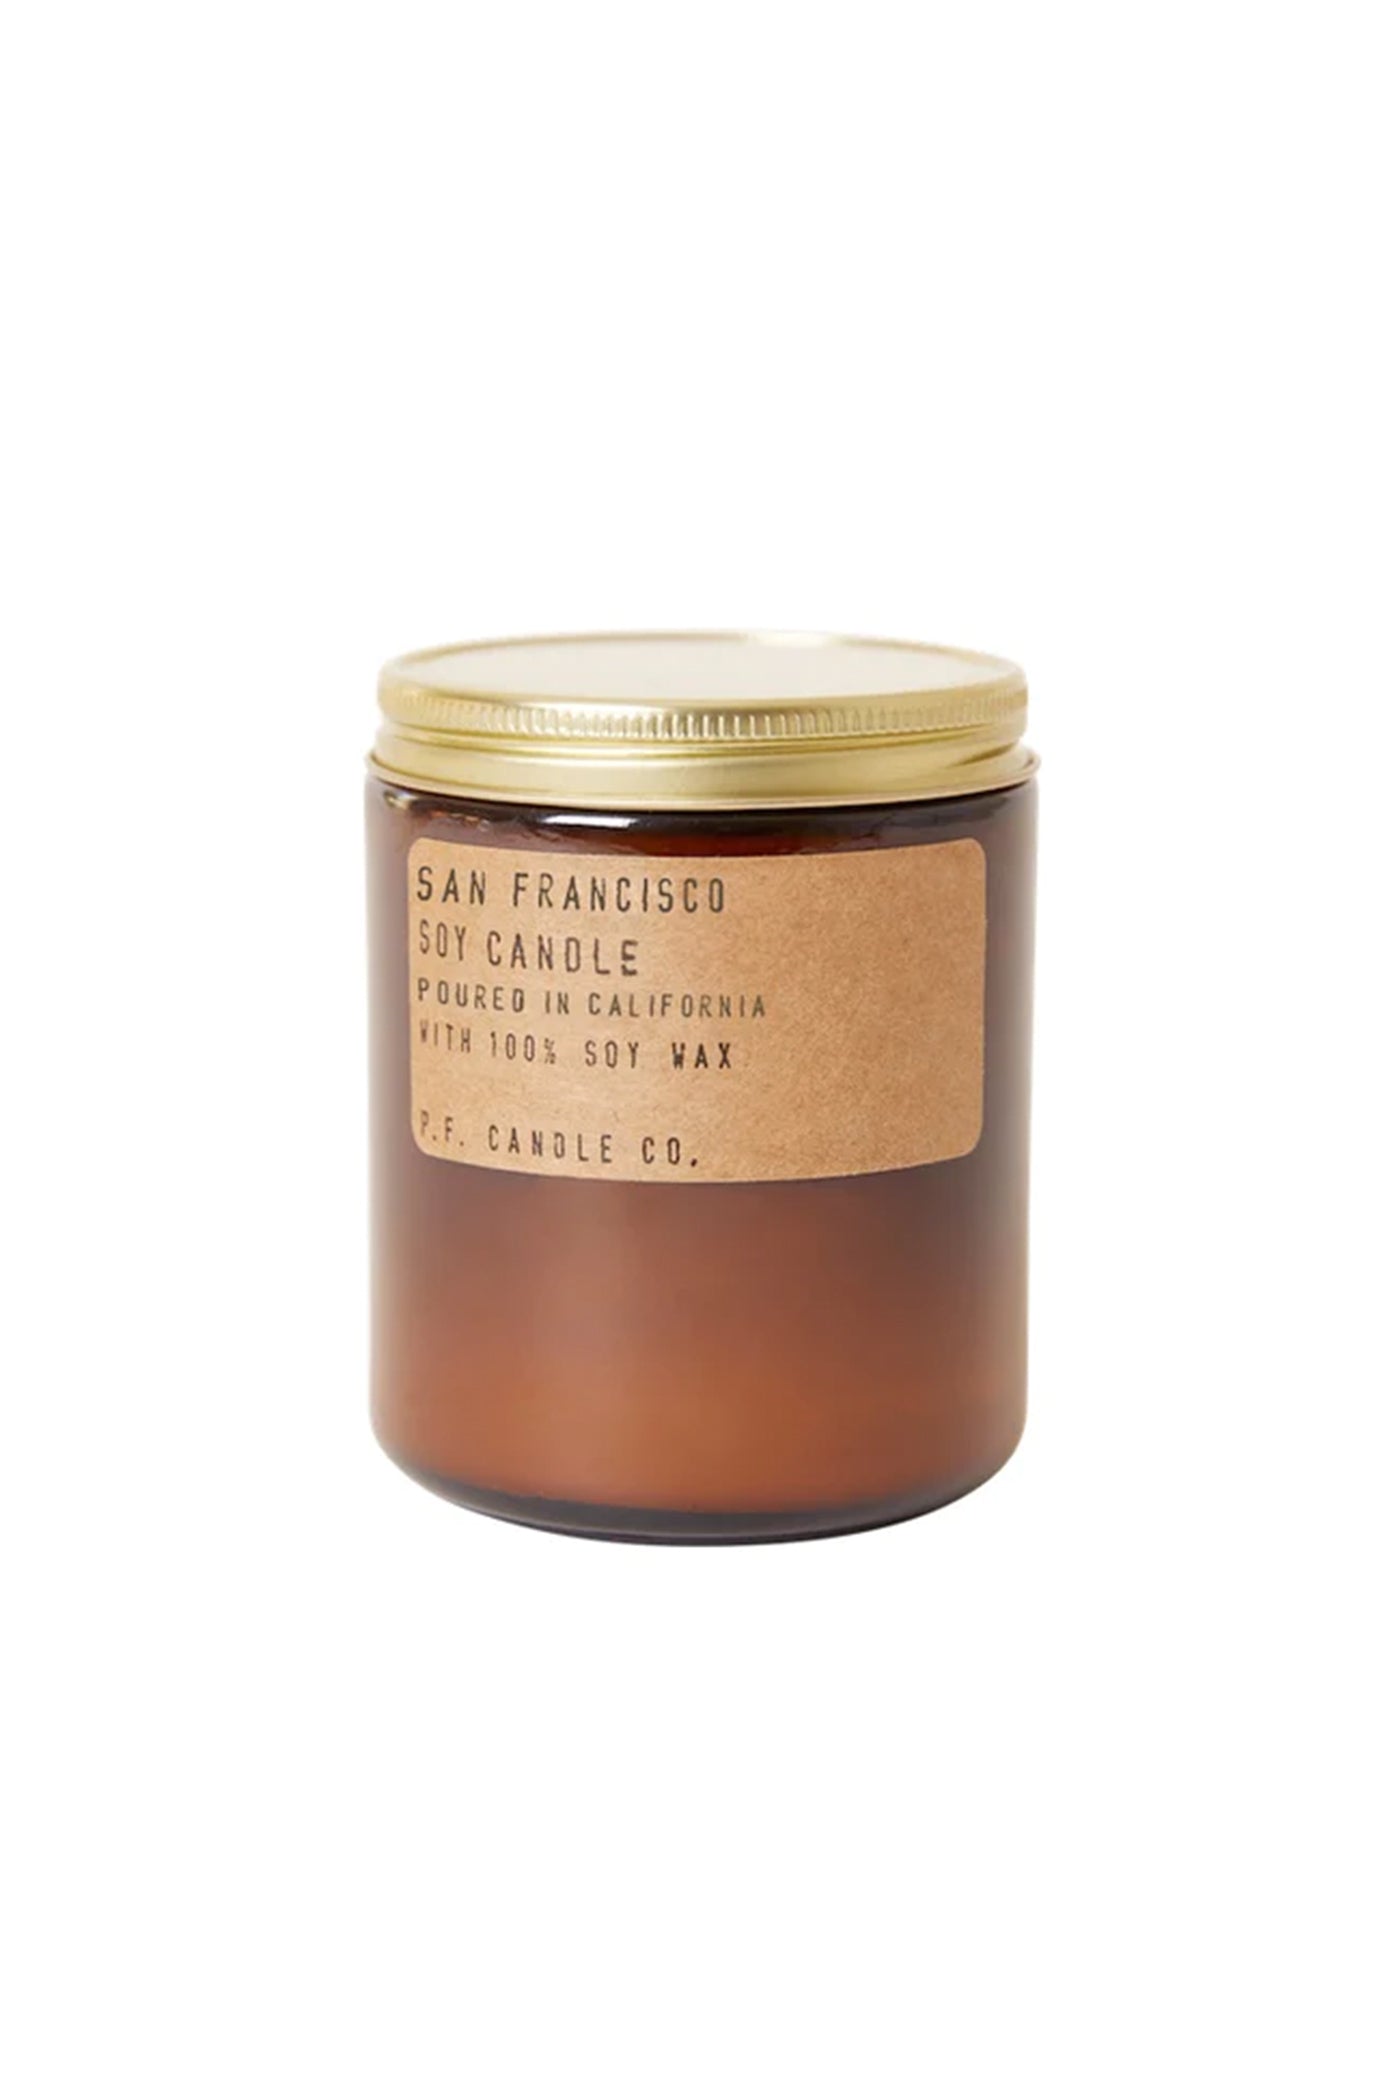 San Francisco 7.2oz Candle by P.F. Candle